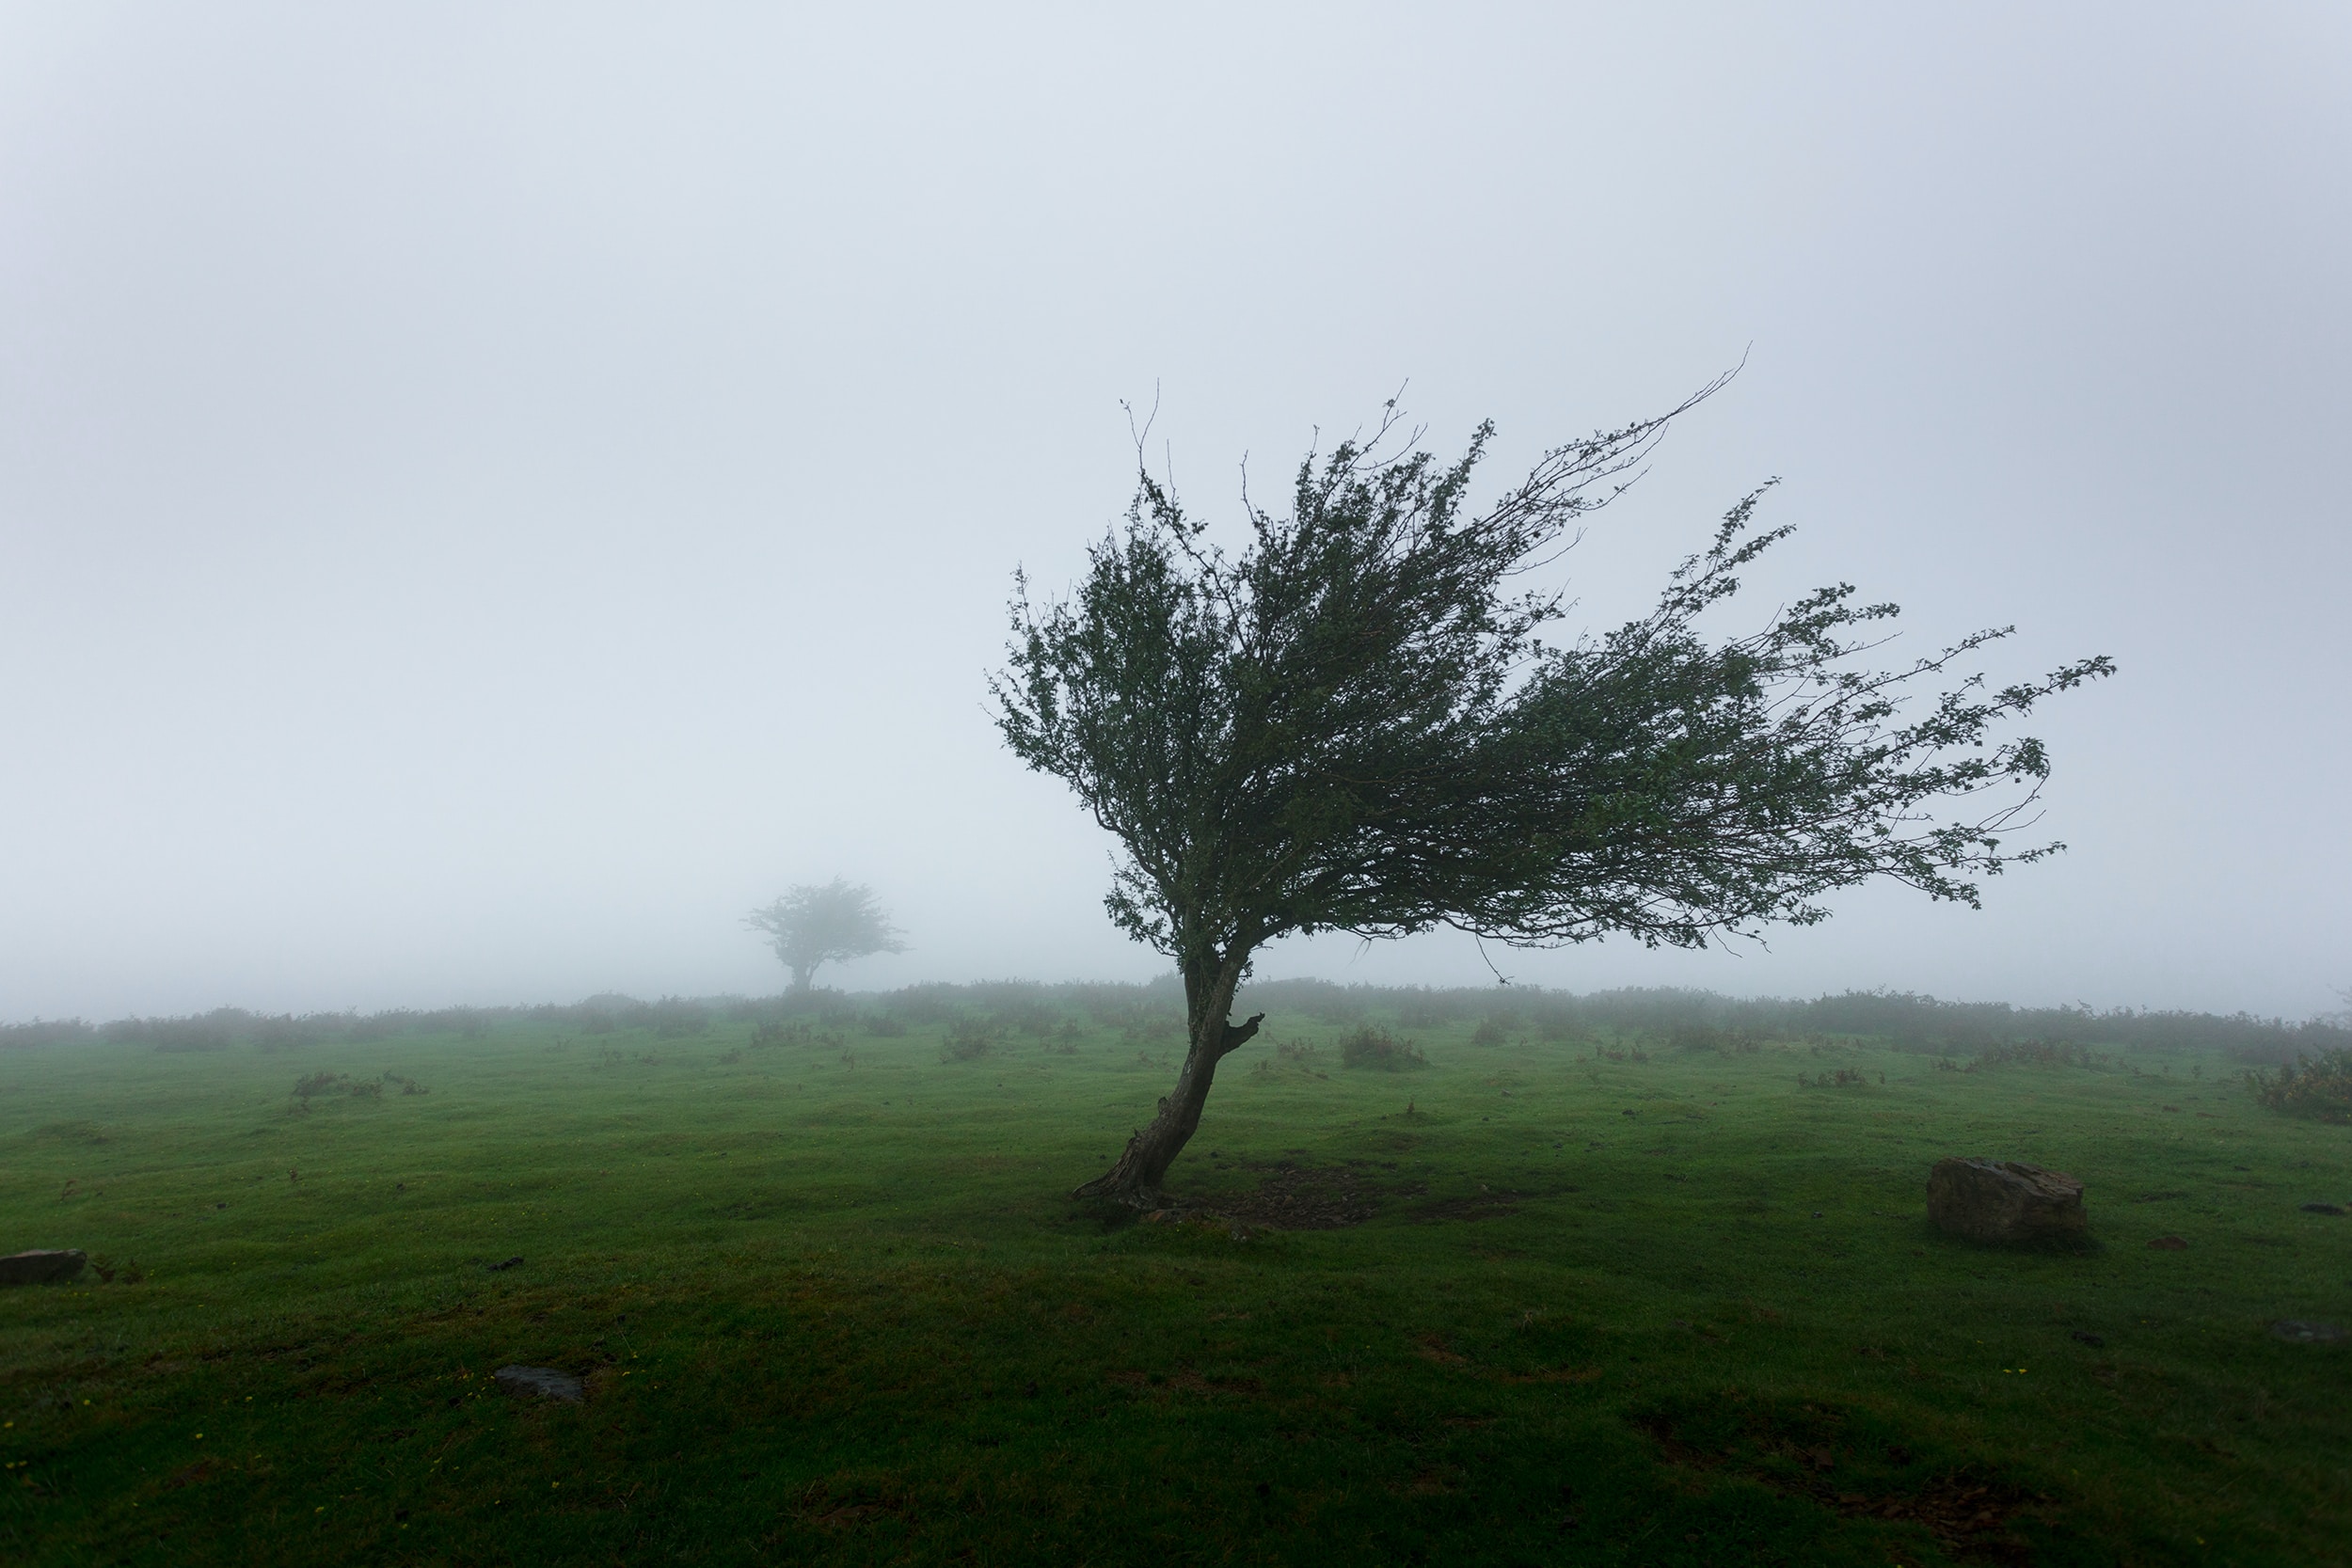 A leafy tree is buffeted by a strong wind. In the foggy background of the windswept landscape, a second, nearly identical tree can barely be seen.